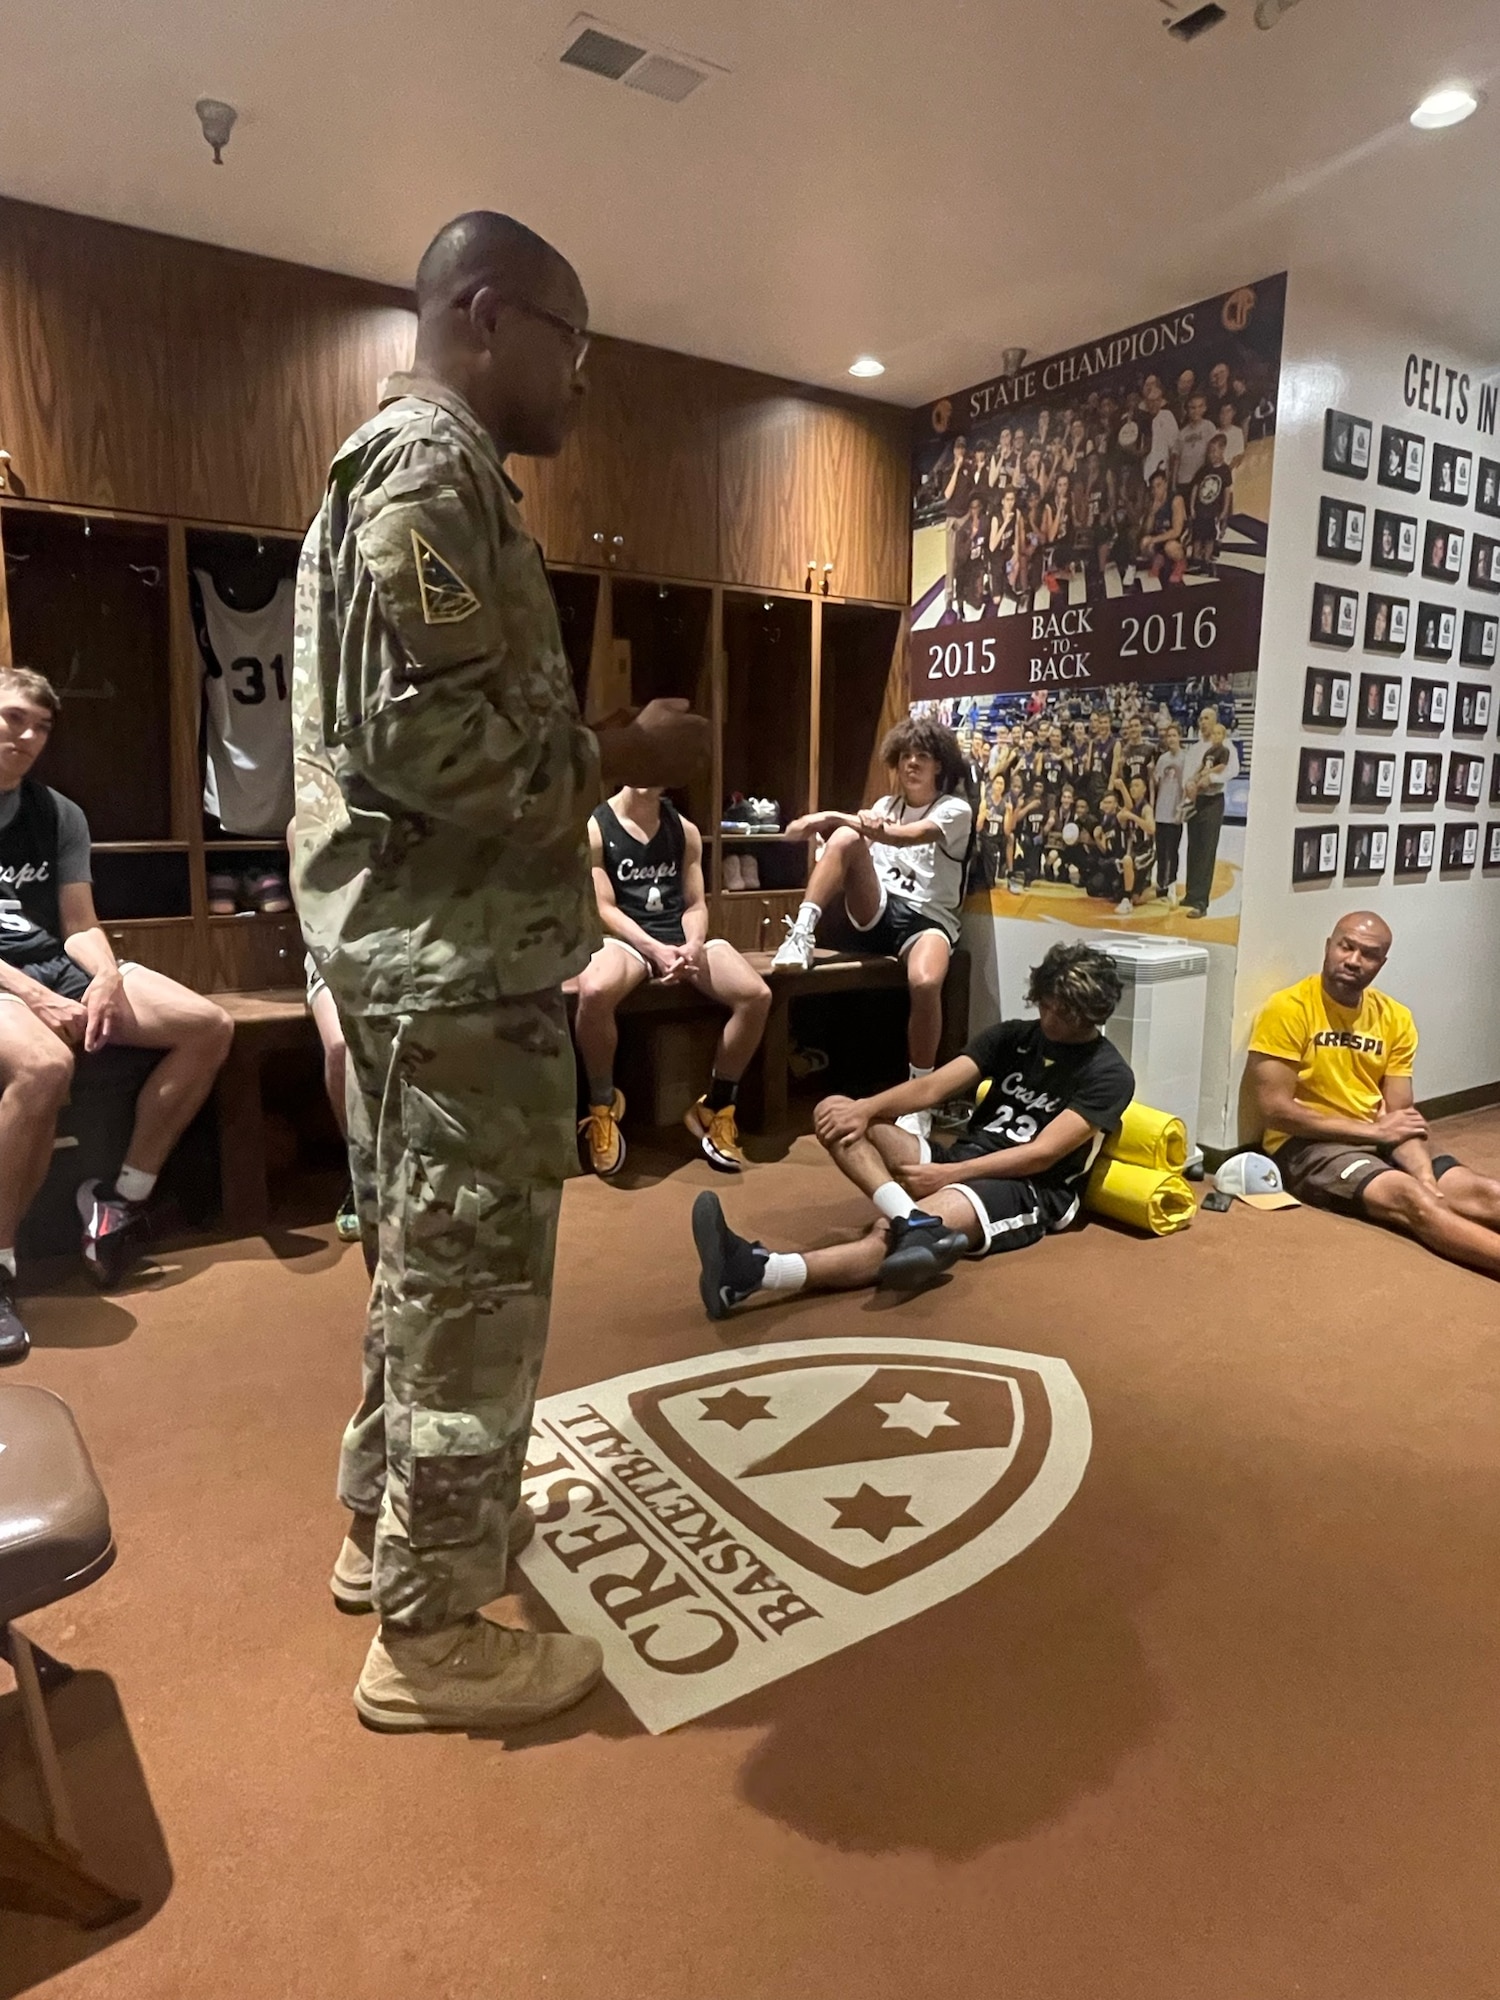 On Nov. 11, Space Systems Command’s Senior Enlisted Leader Chief Master Sgt. Willie Frazier, met with players from Crespi Highschool varsity basketball team ahead of their Veterans Day scrimmage. Los Angeles Lakers alum Derek Fisher, who coaches the team, invited Frazier to talk with the players ahead of their Veterans Day scrimmage. Frazier shared his thoughts and wisdom on commitment and what it means to put service before self. Photo by MSgt Dantae Seward, Space Systems Command.